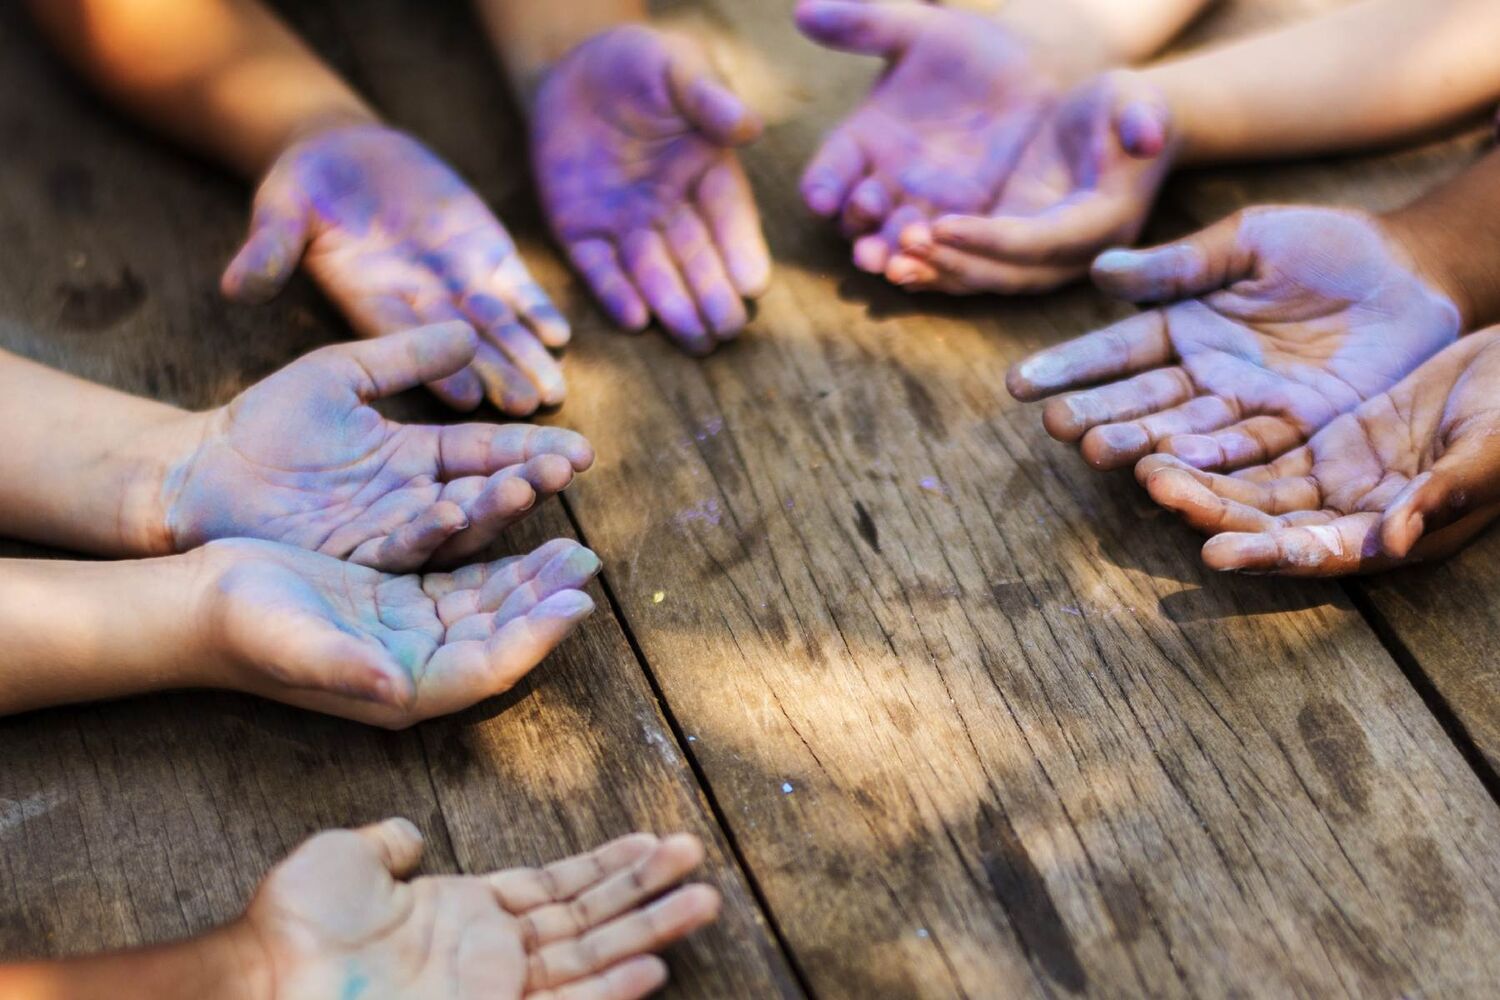 Five Sets Of Childrens Hands Covered In Purple Chalk